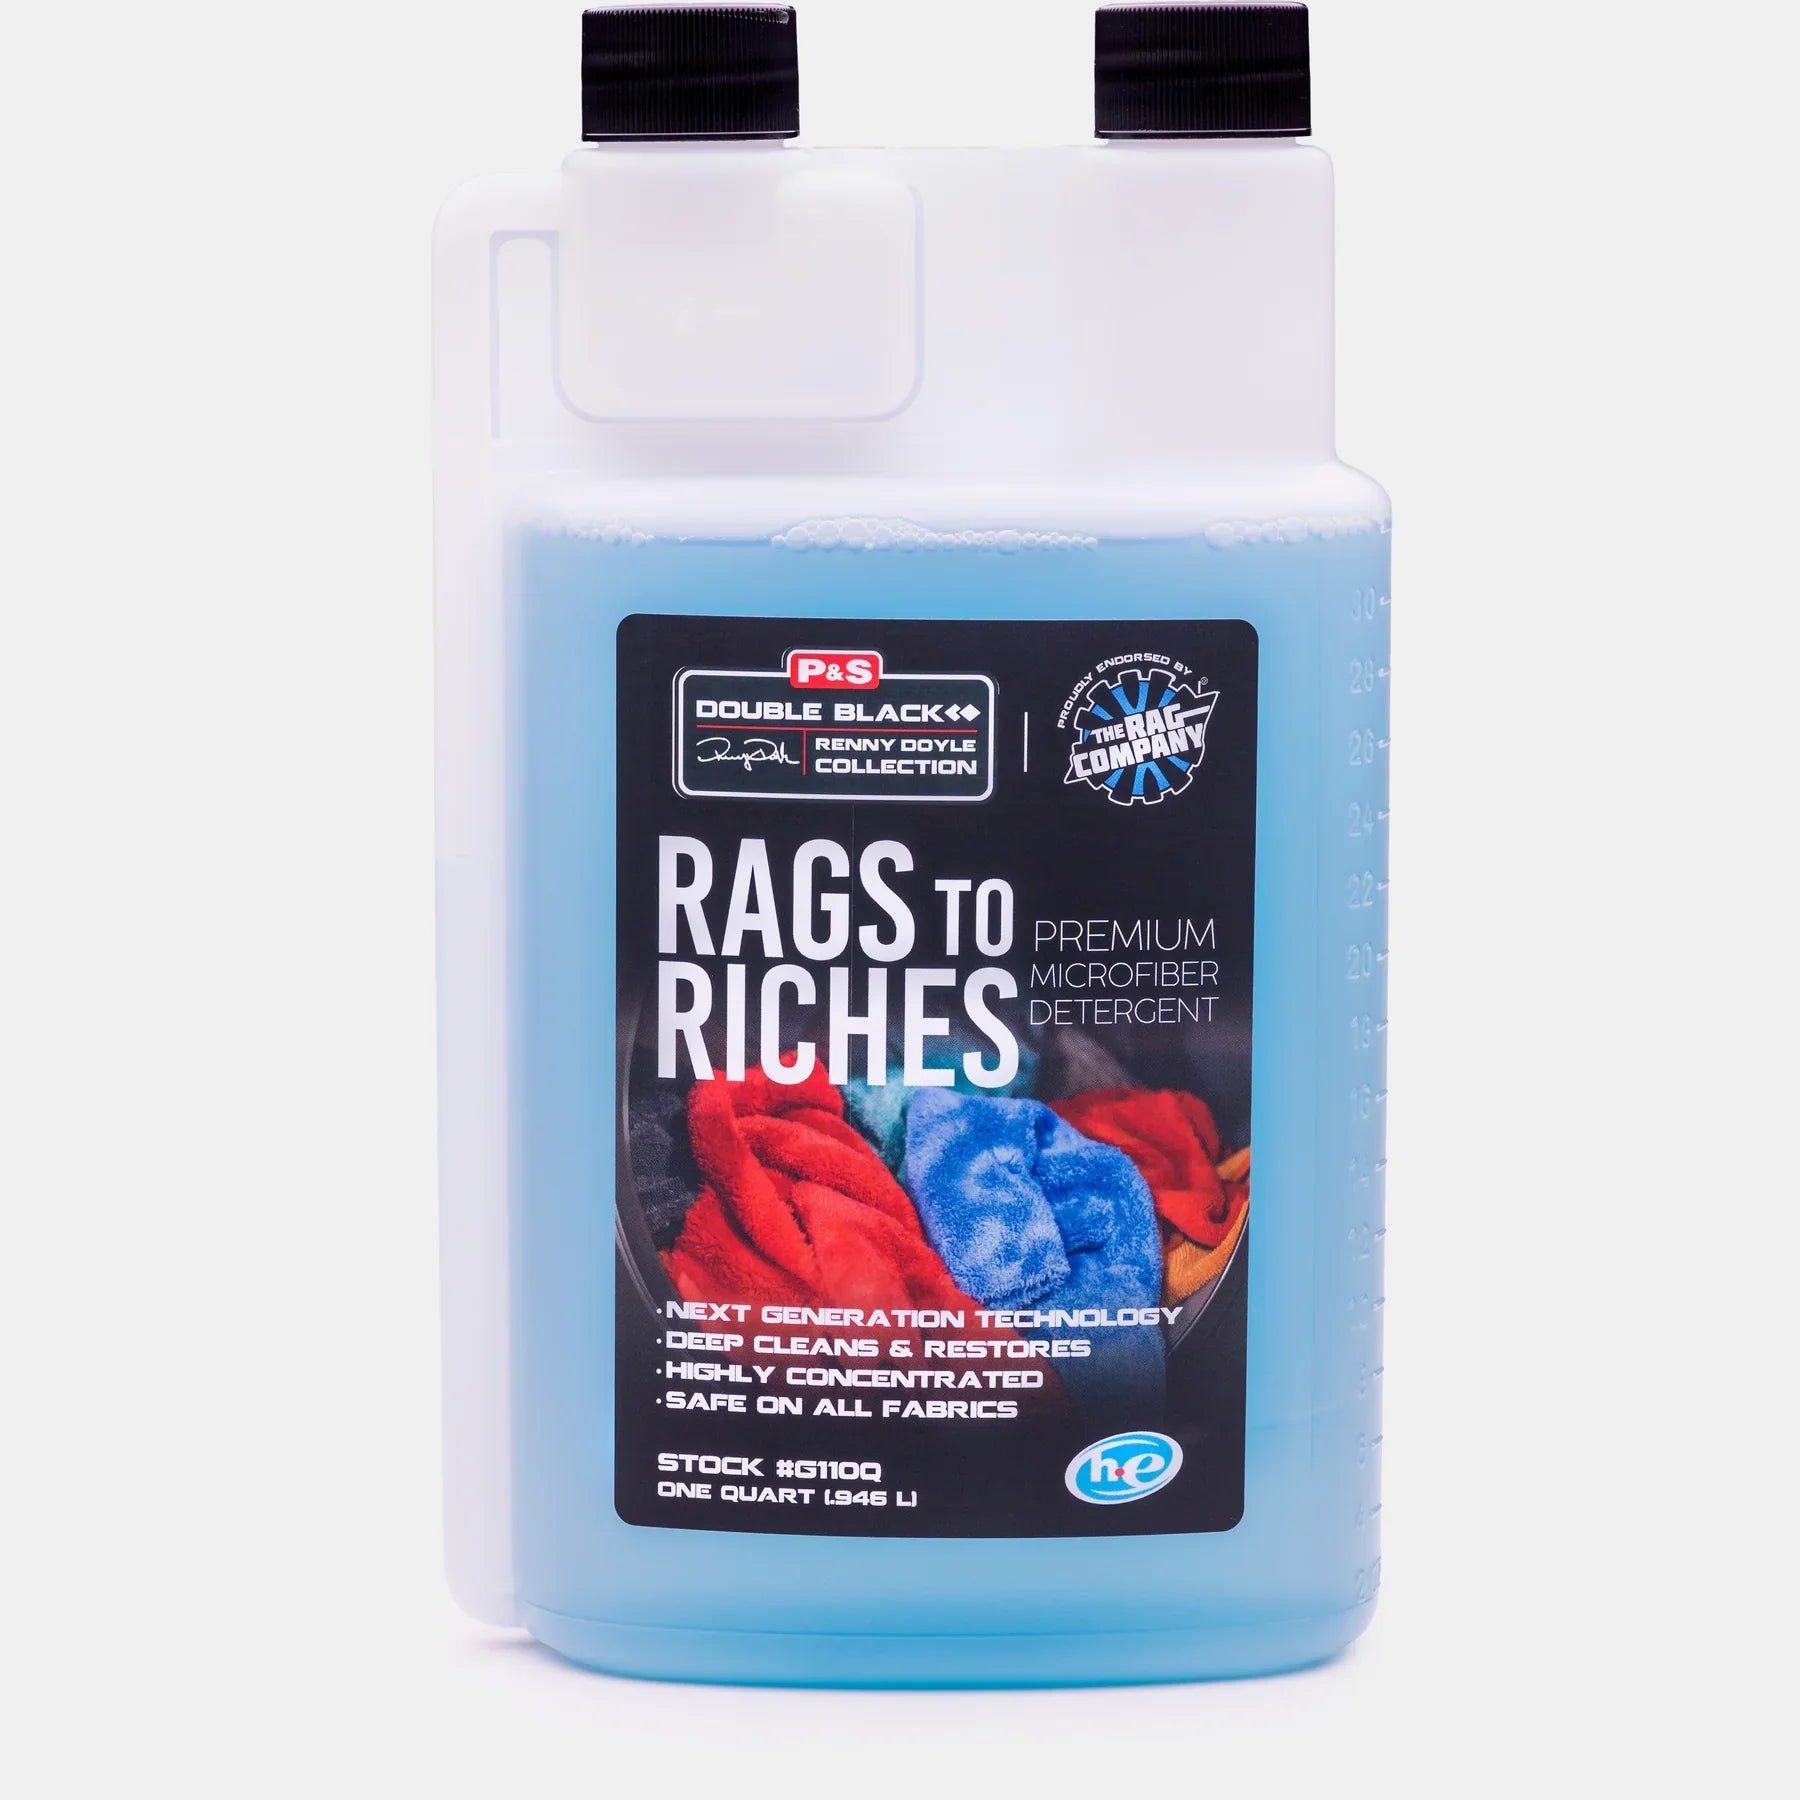 Detailed view of Rags to Riches detergent label, highlighting its benefits and usage instructions for optimal microfiber care.